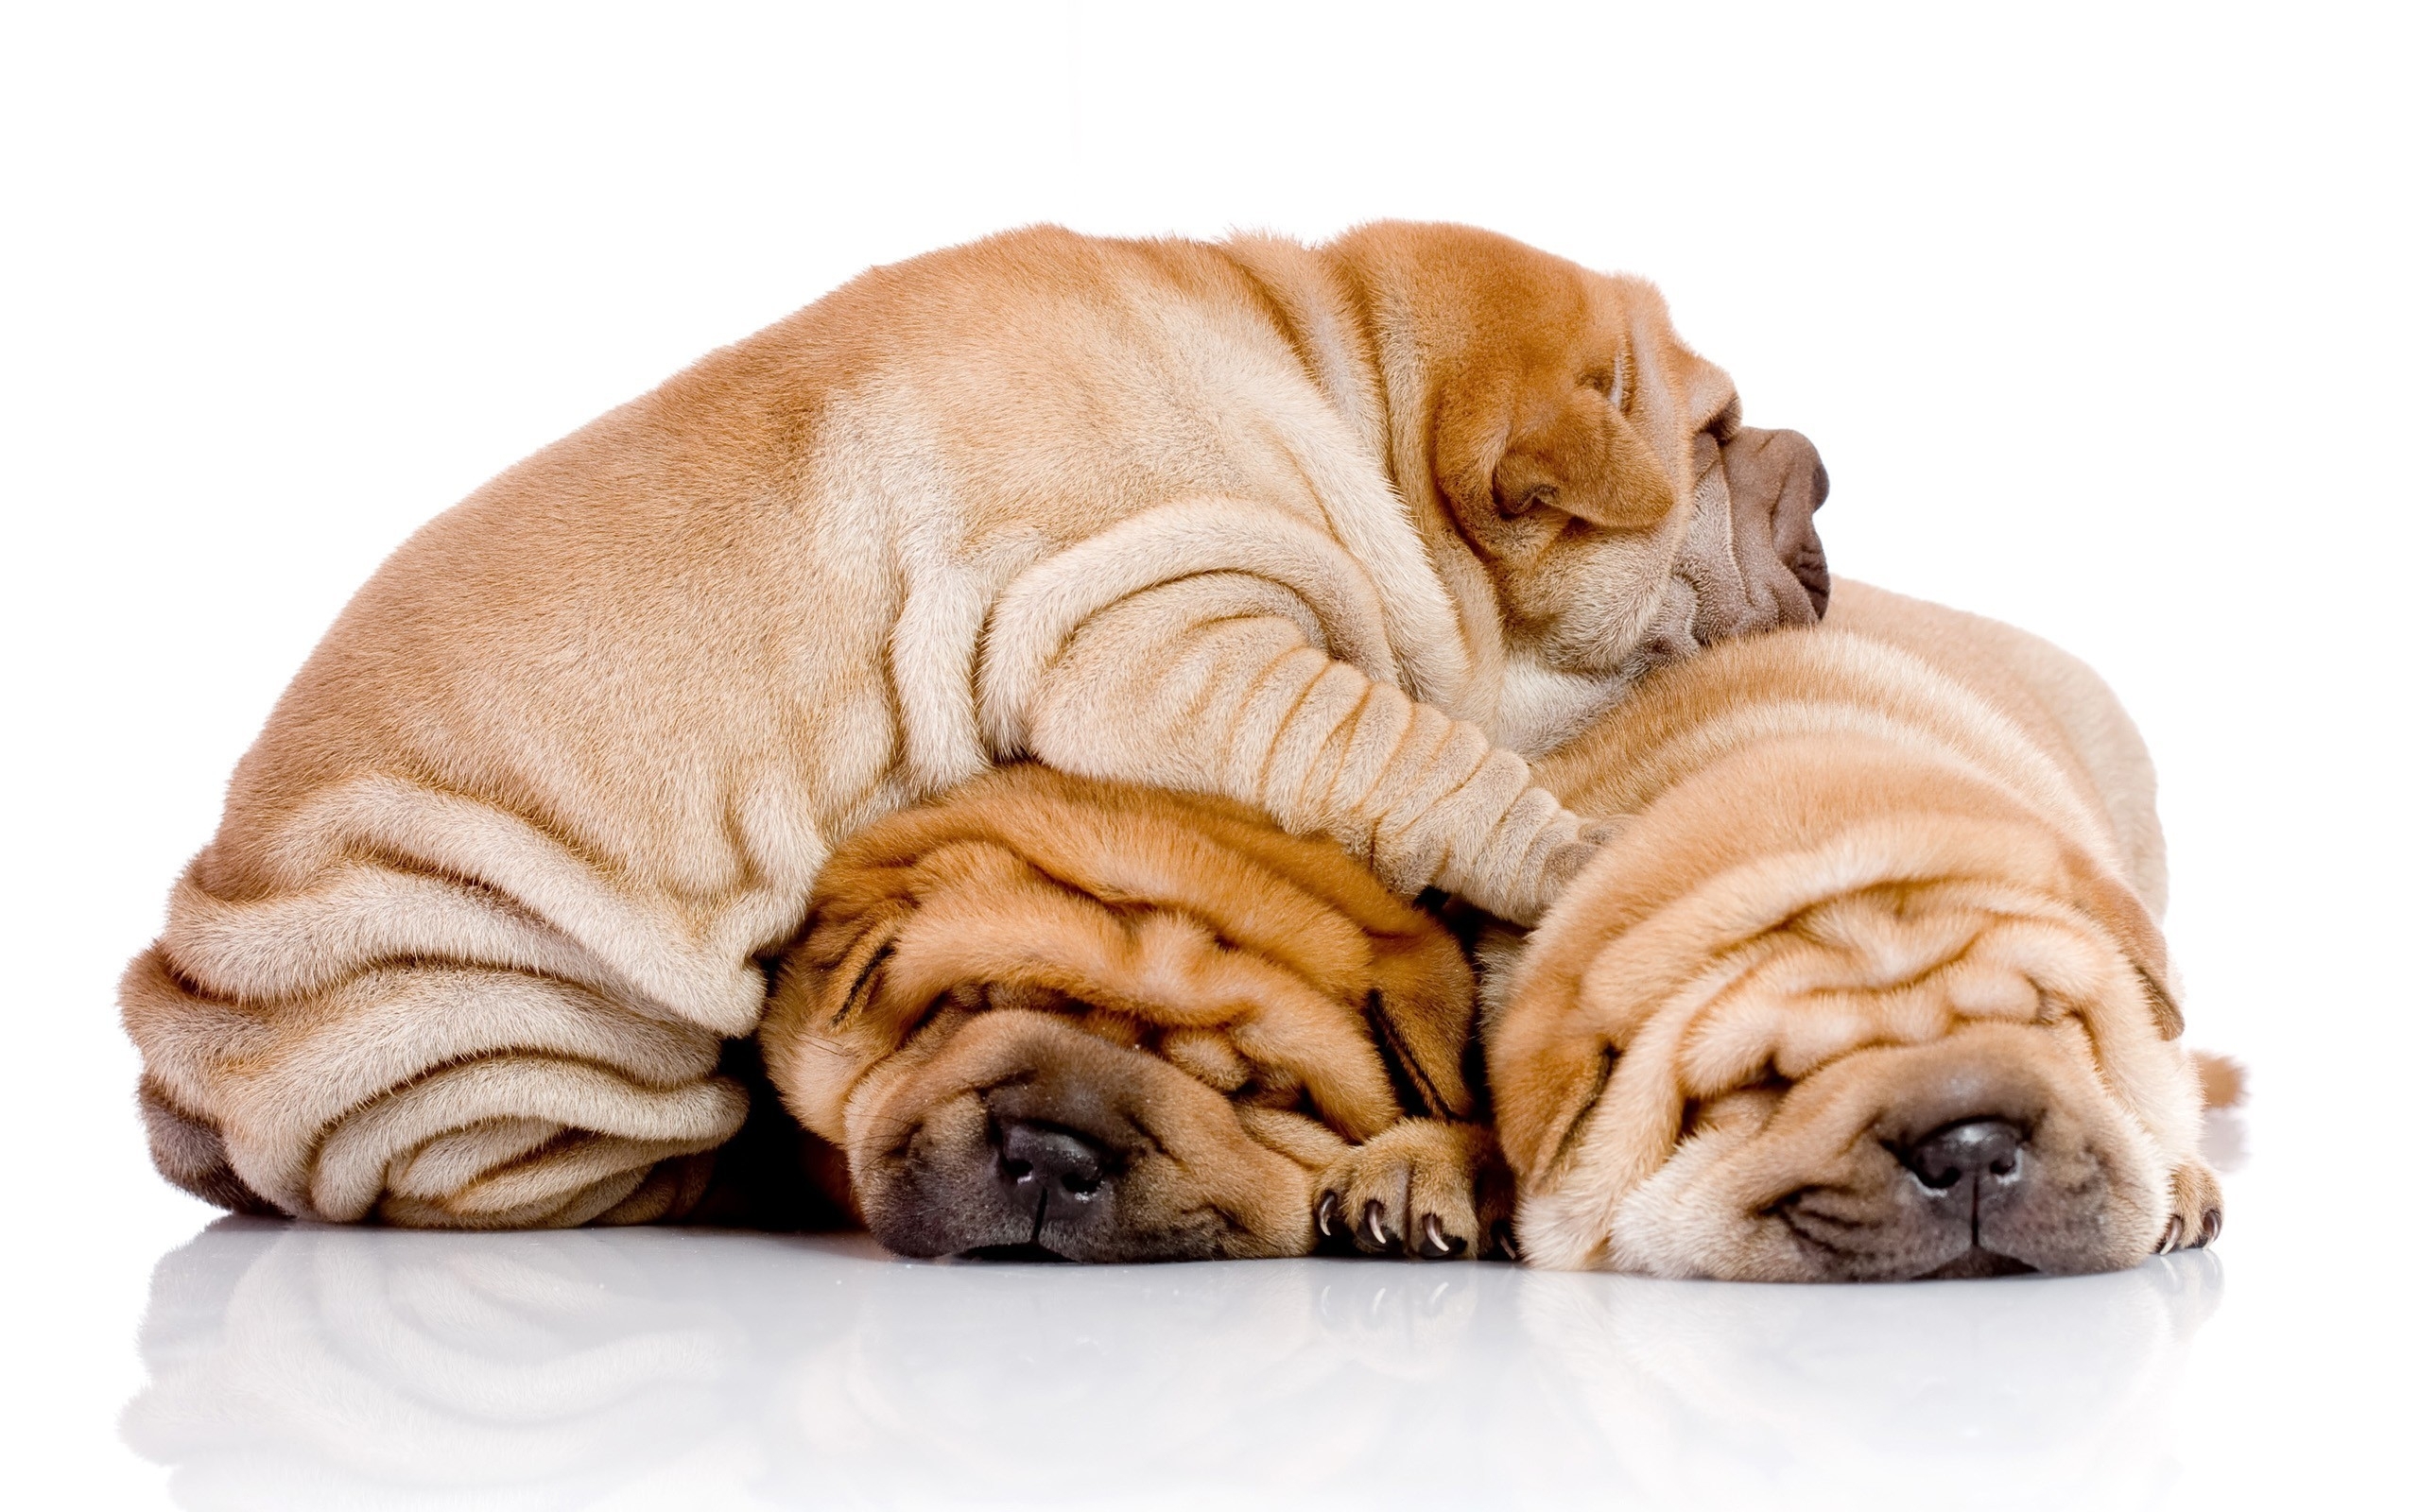 three Shar-Pei lying down sleeping on the floor while the third one is sleeping on top of them in an isolated whit background